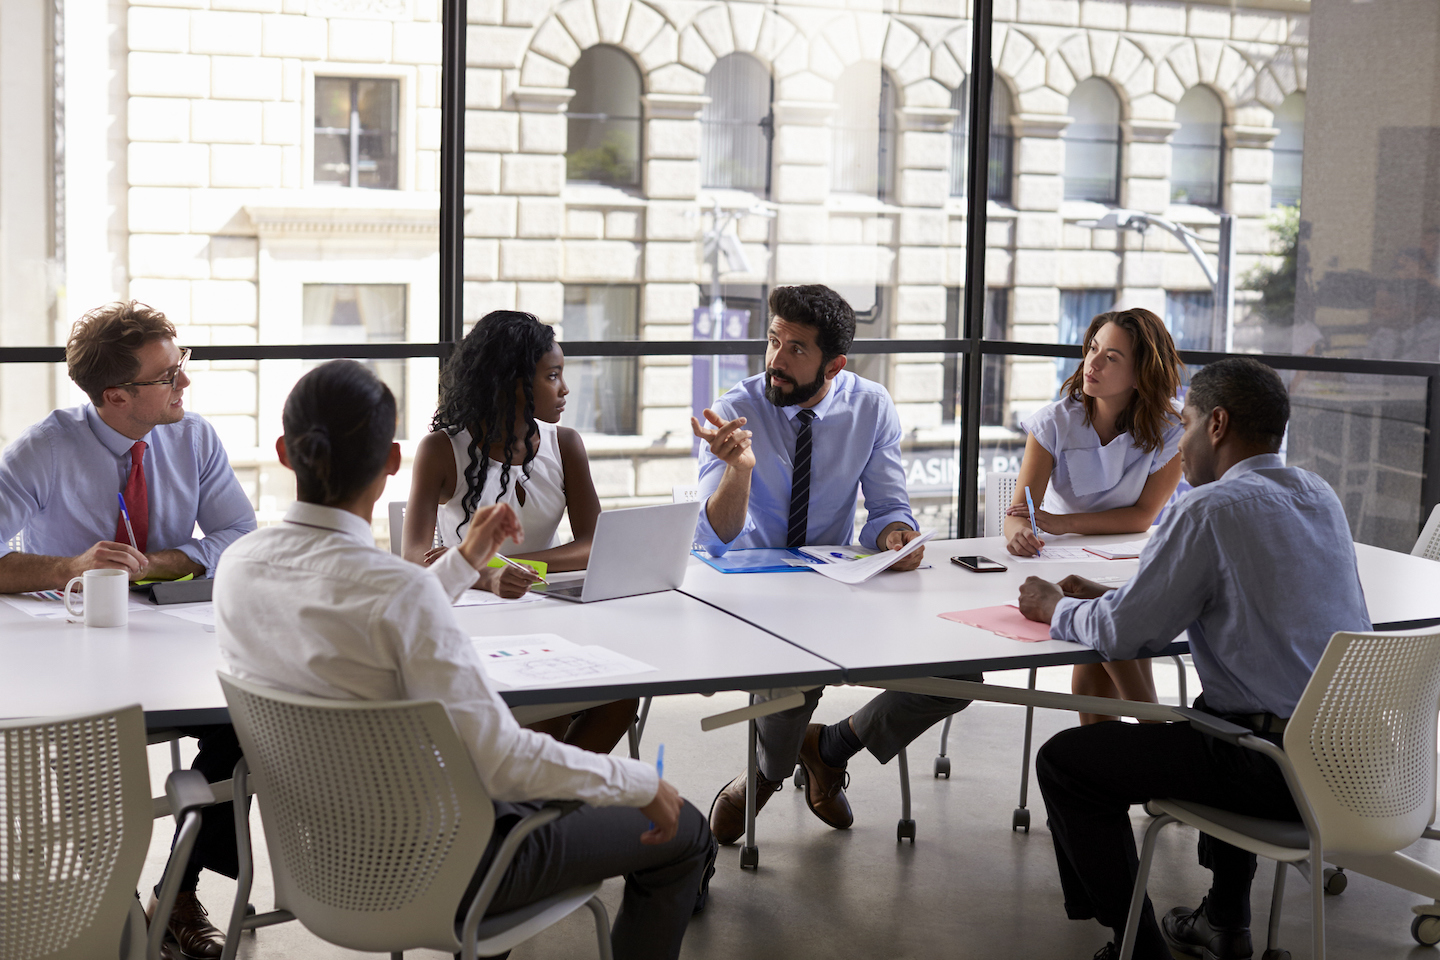 6 Tips to Make Meetings More Productive